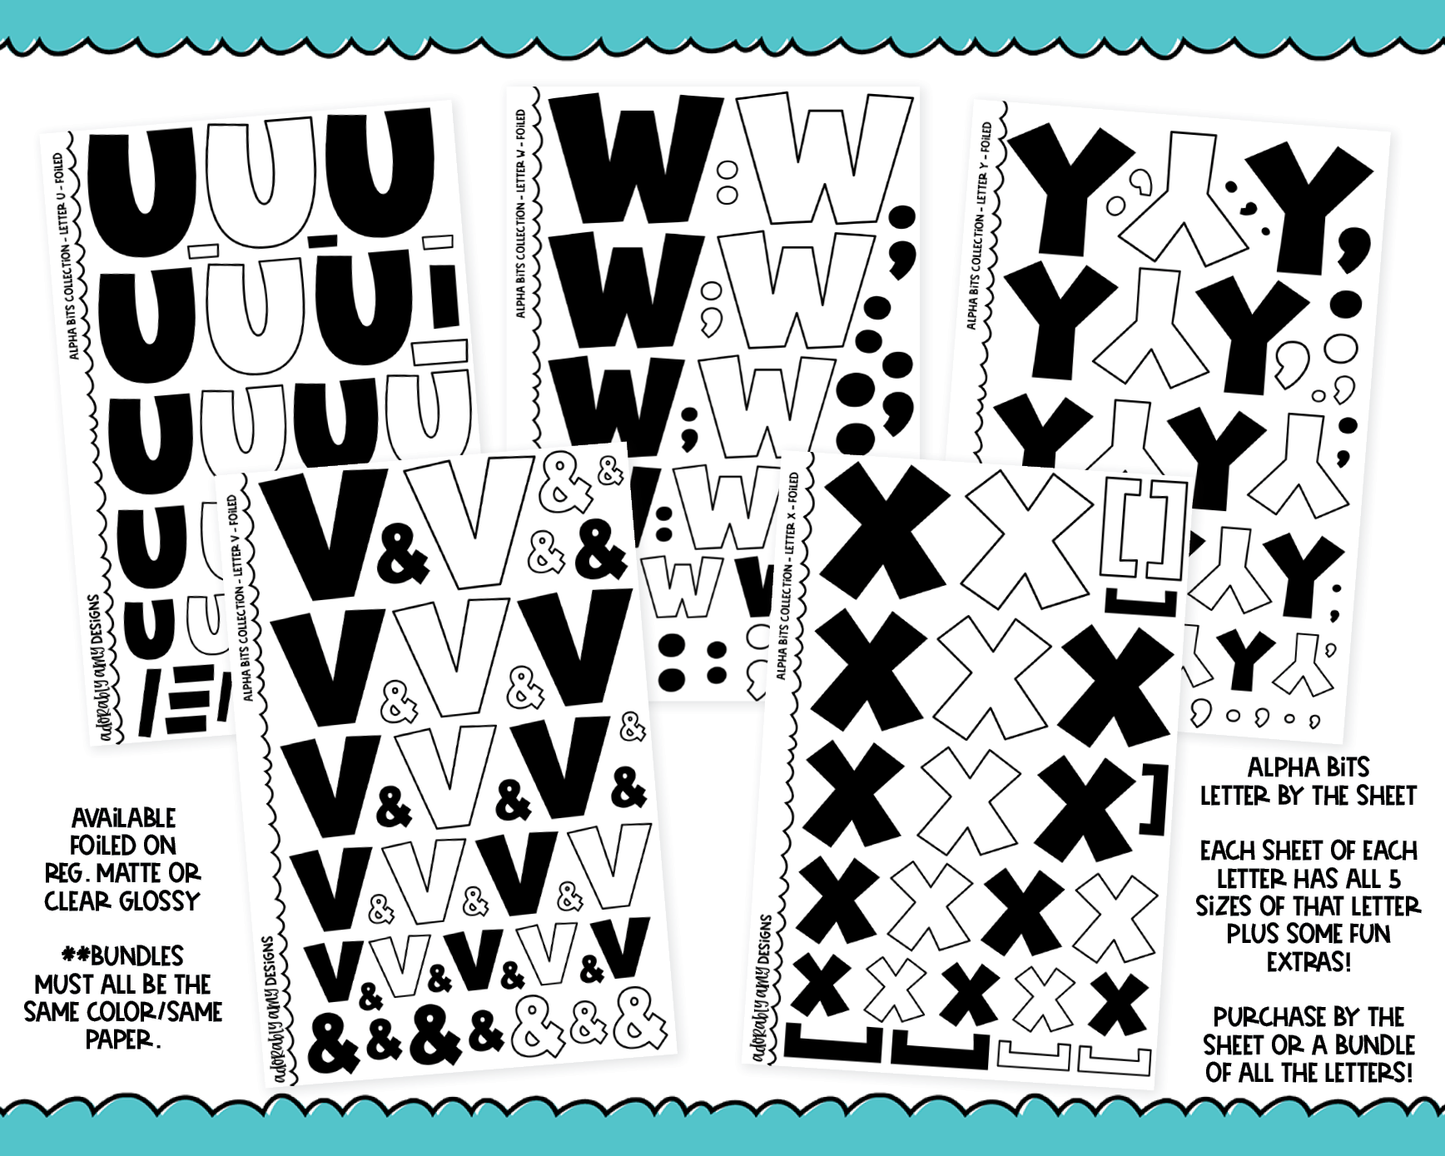 Foiled Alpha Bits V1 Letter Stickers Grouped by Letter Typography Planner Stickers for any Planner or Insert